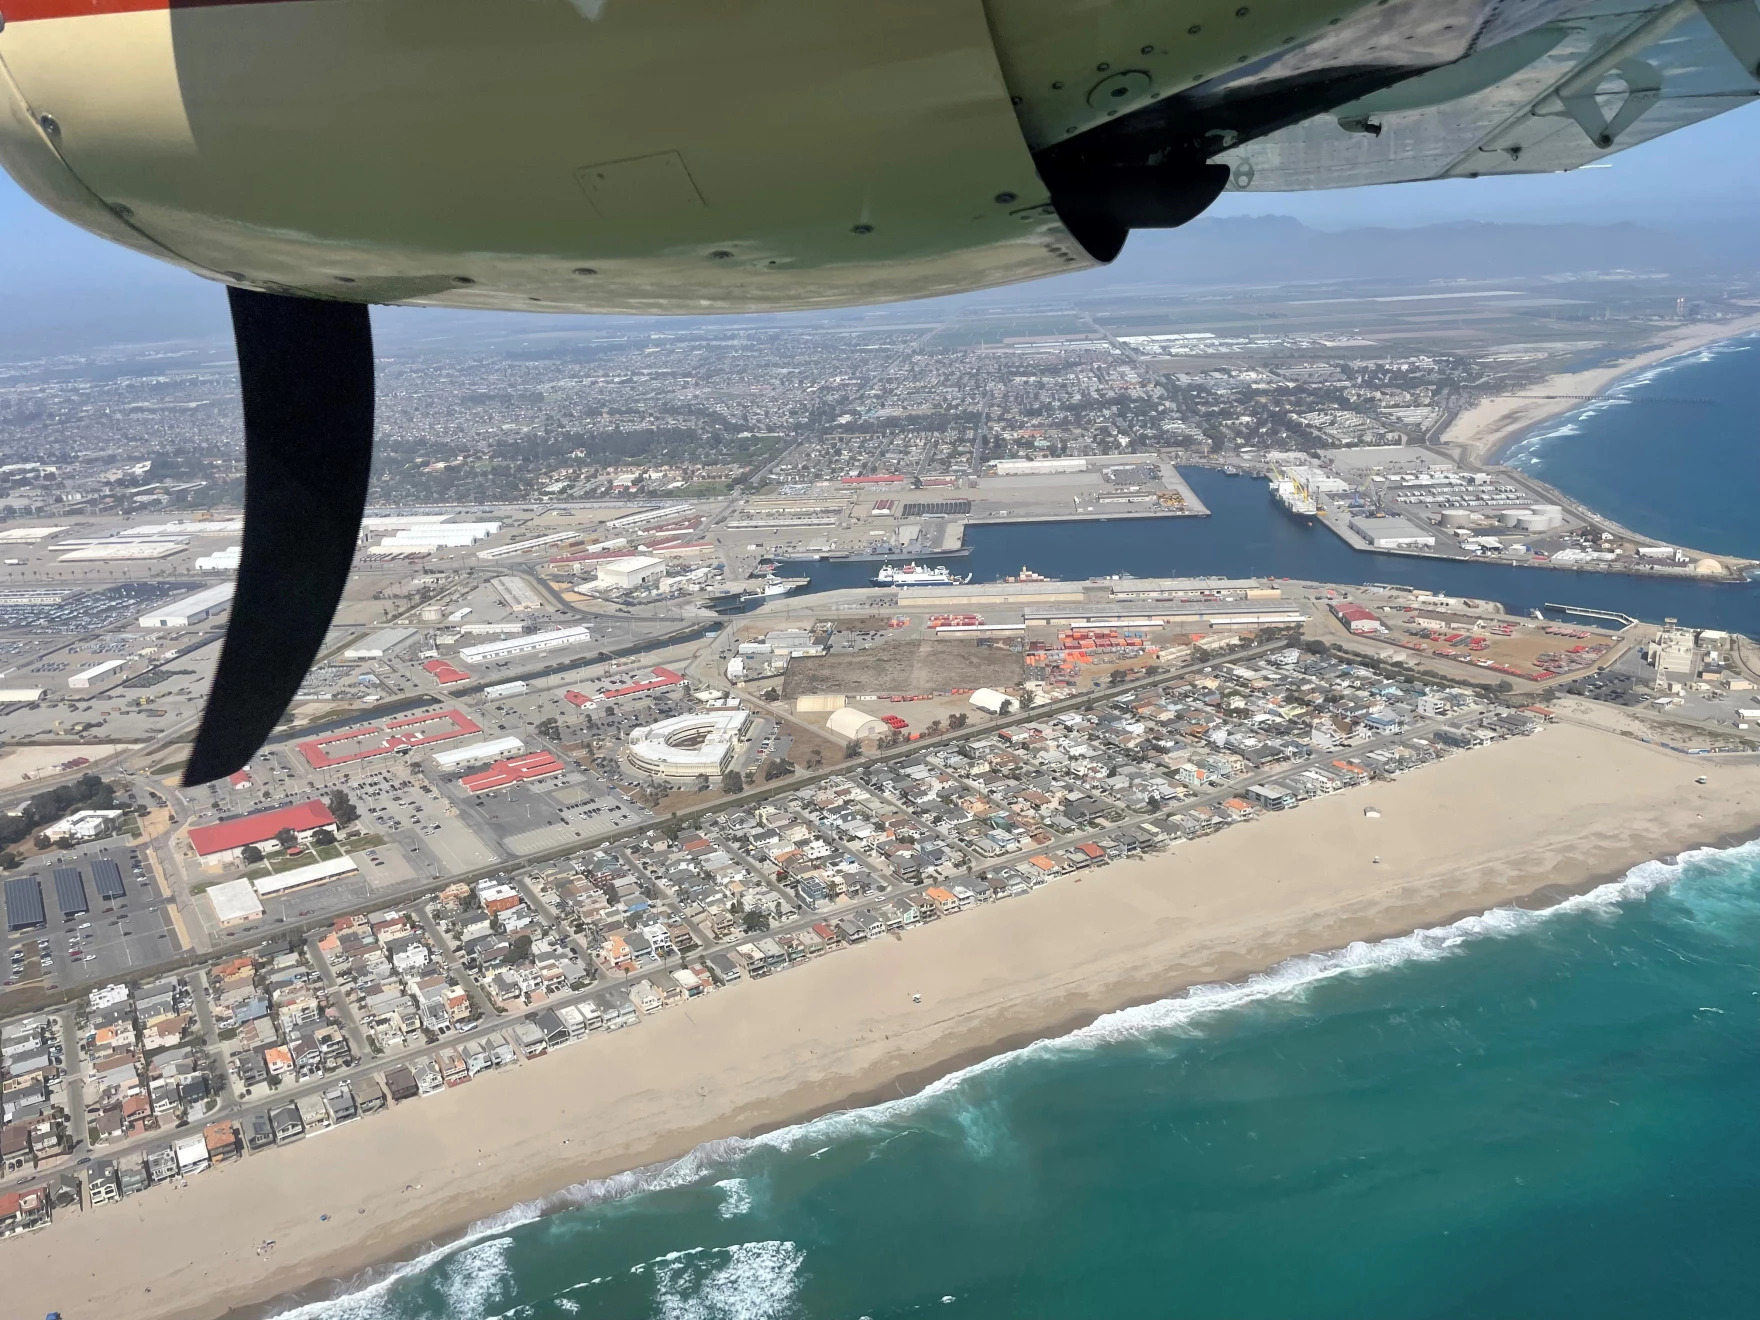 an ariel view looking out the window of a small propellor plane, looking out onto southern california coastline